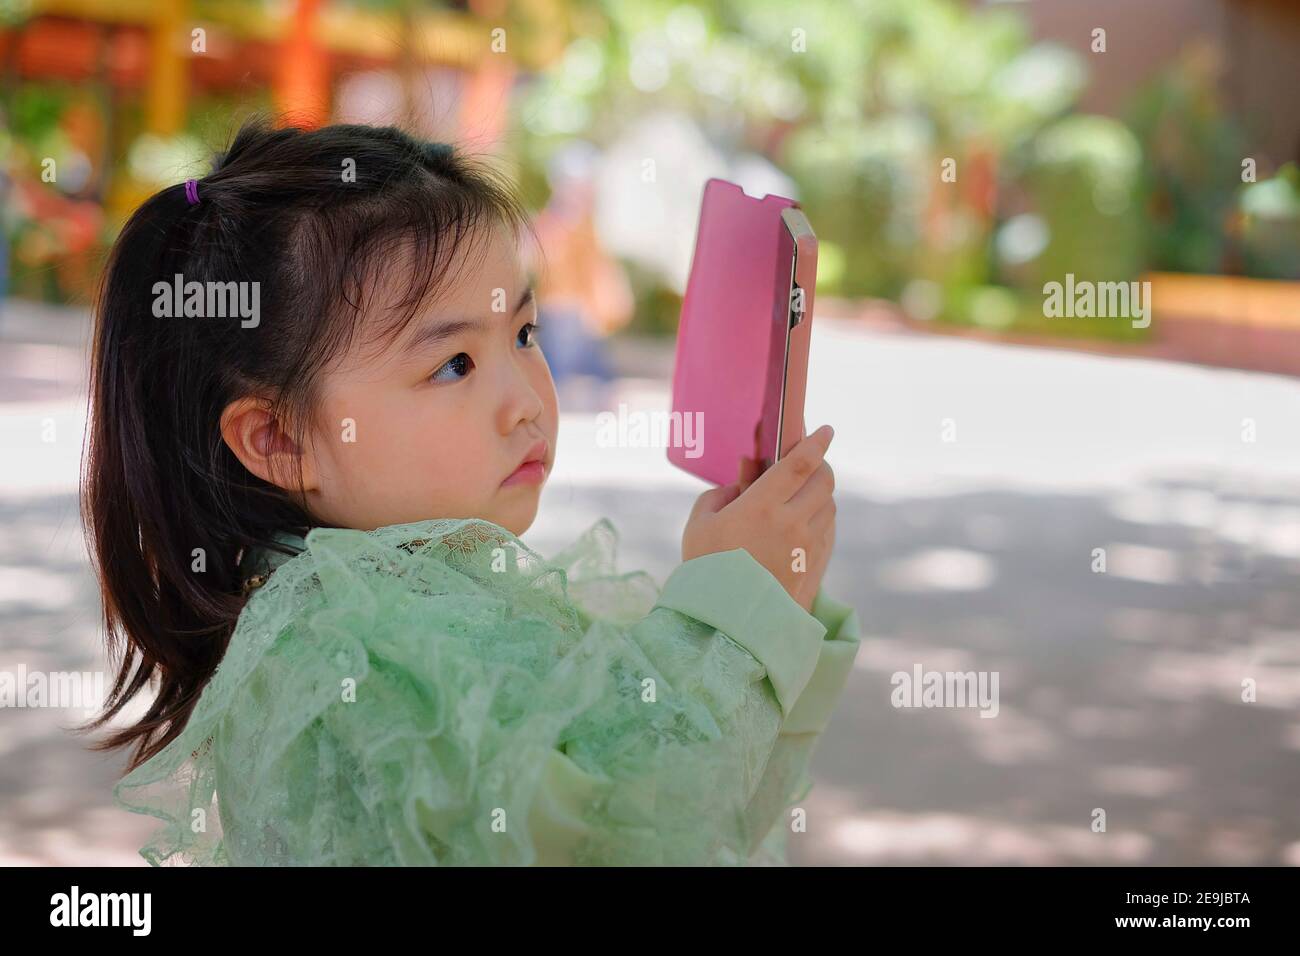 A cute young Asian girl is holding a pink smartphone, trying to take a picture on her vacation. Stock Photo